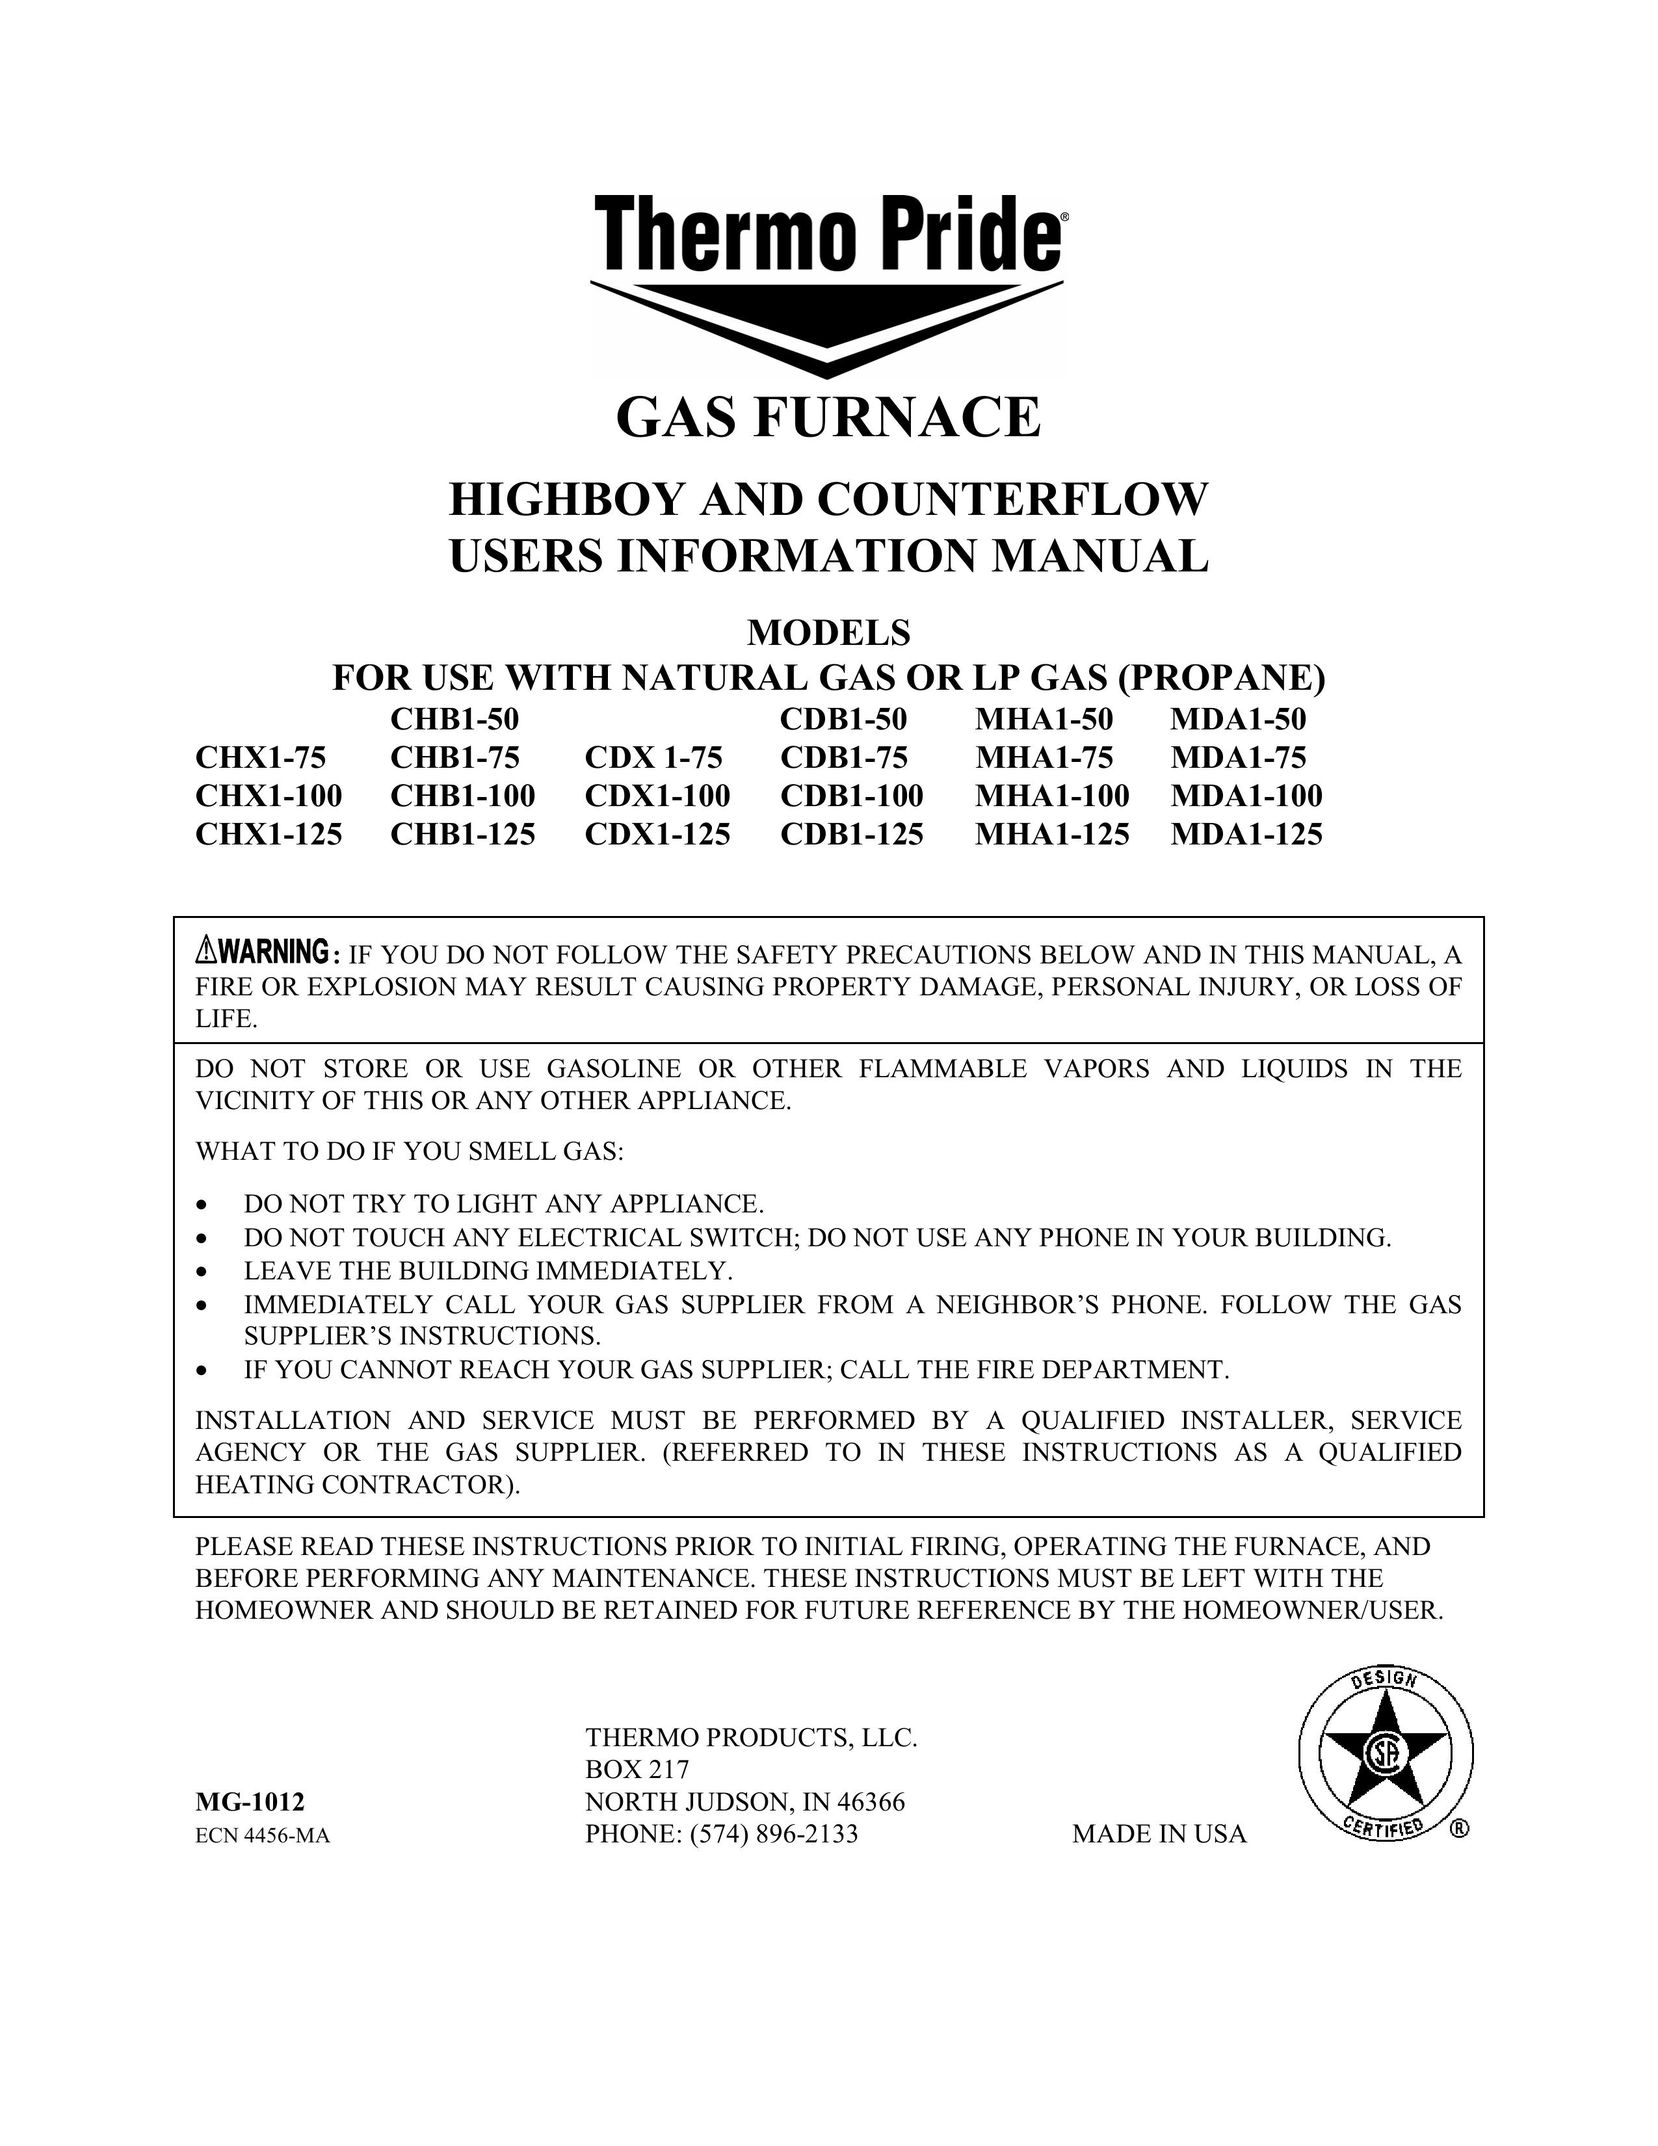 Thermo Products CDB1-125 Furnace User Manual